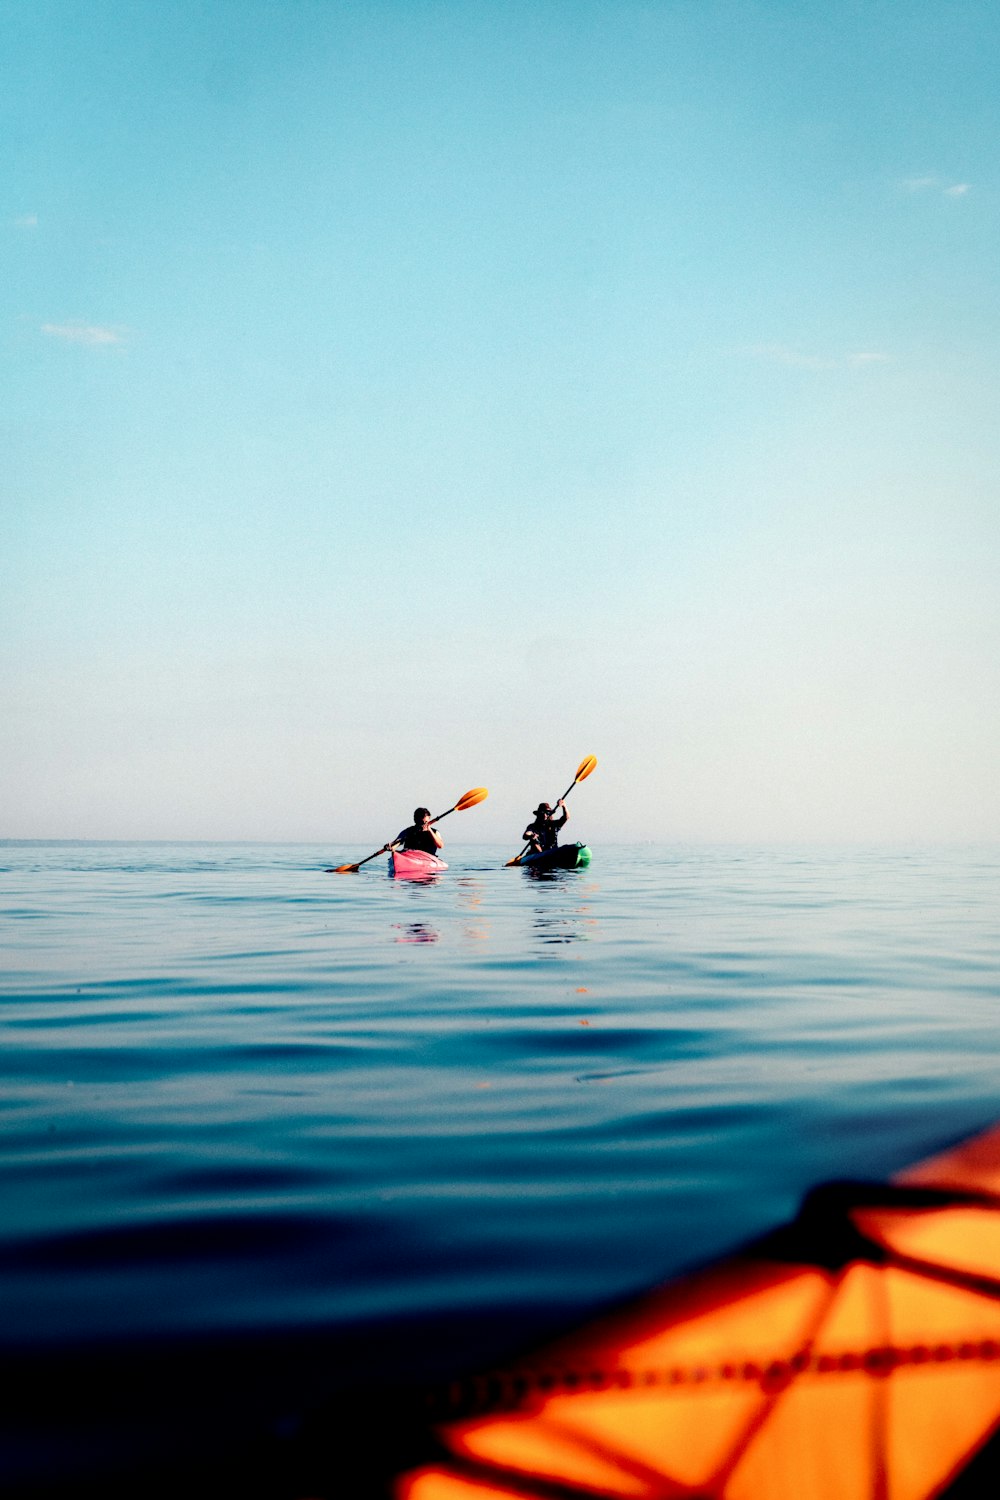 person in black wet suit riding on kayak on blue sea during daytime